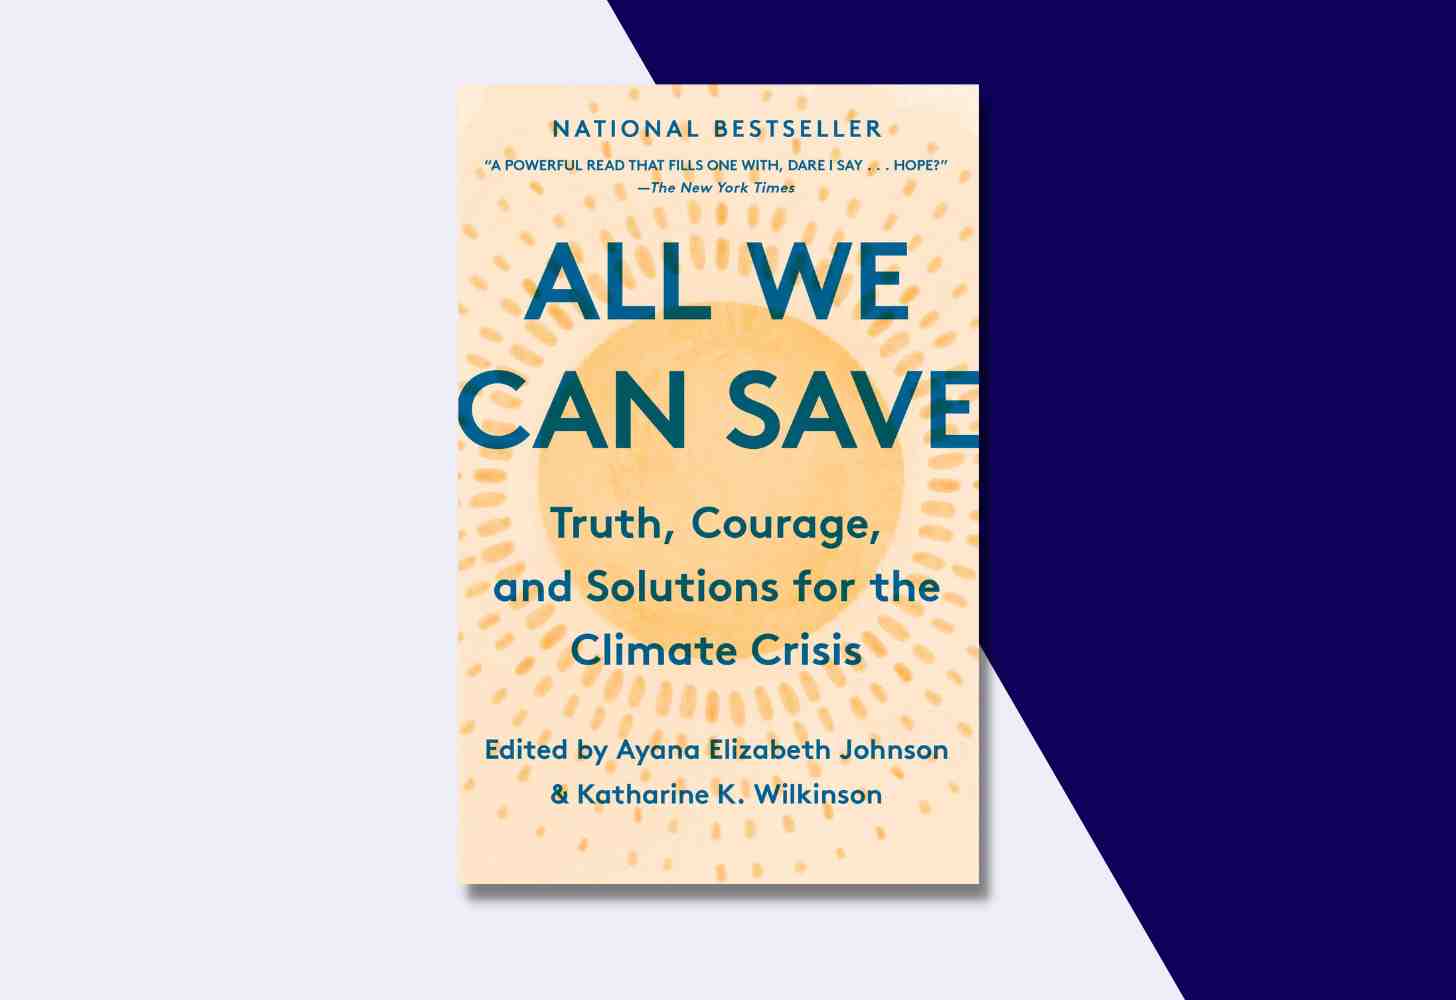 The Cover Of: “All We Can Save: Truth, Courage, and Solutions for the Climate Crisis” edited by Ayana Elizabeth Johnson and Katharine K. Wilkinson